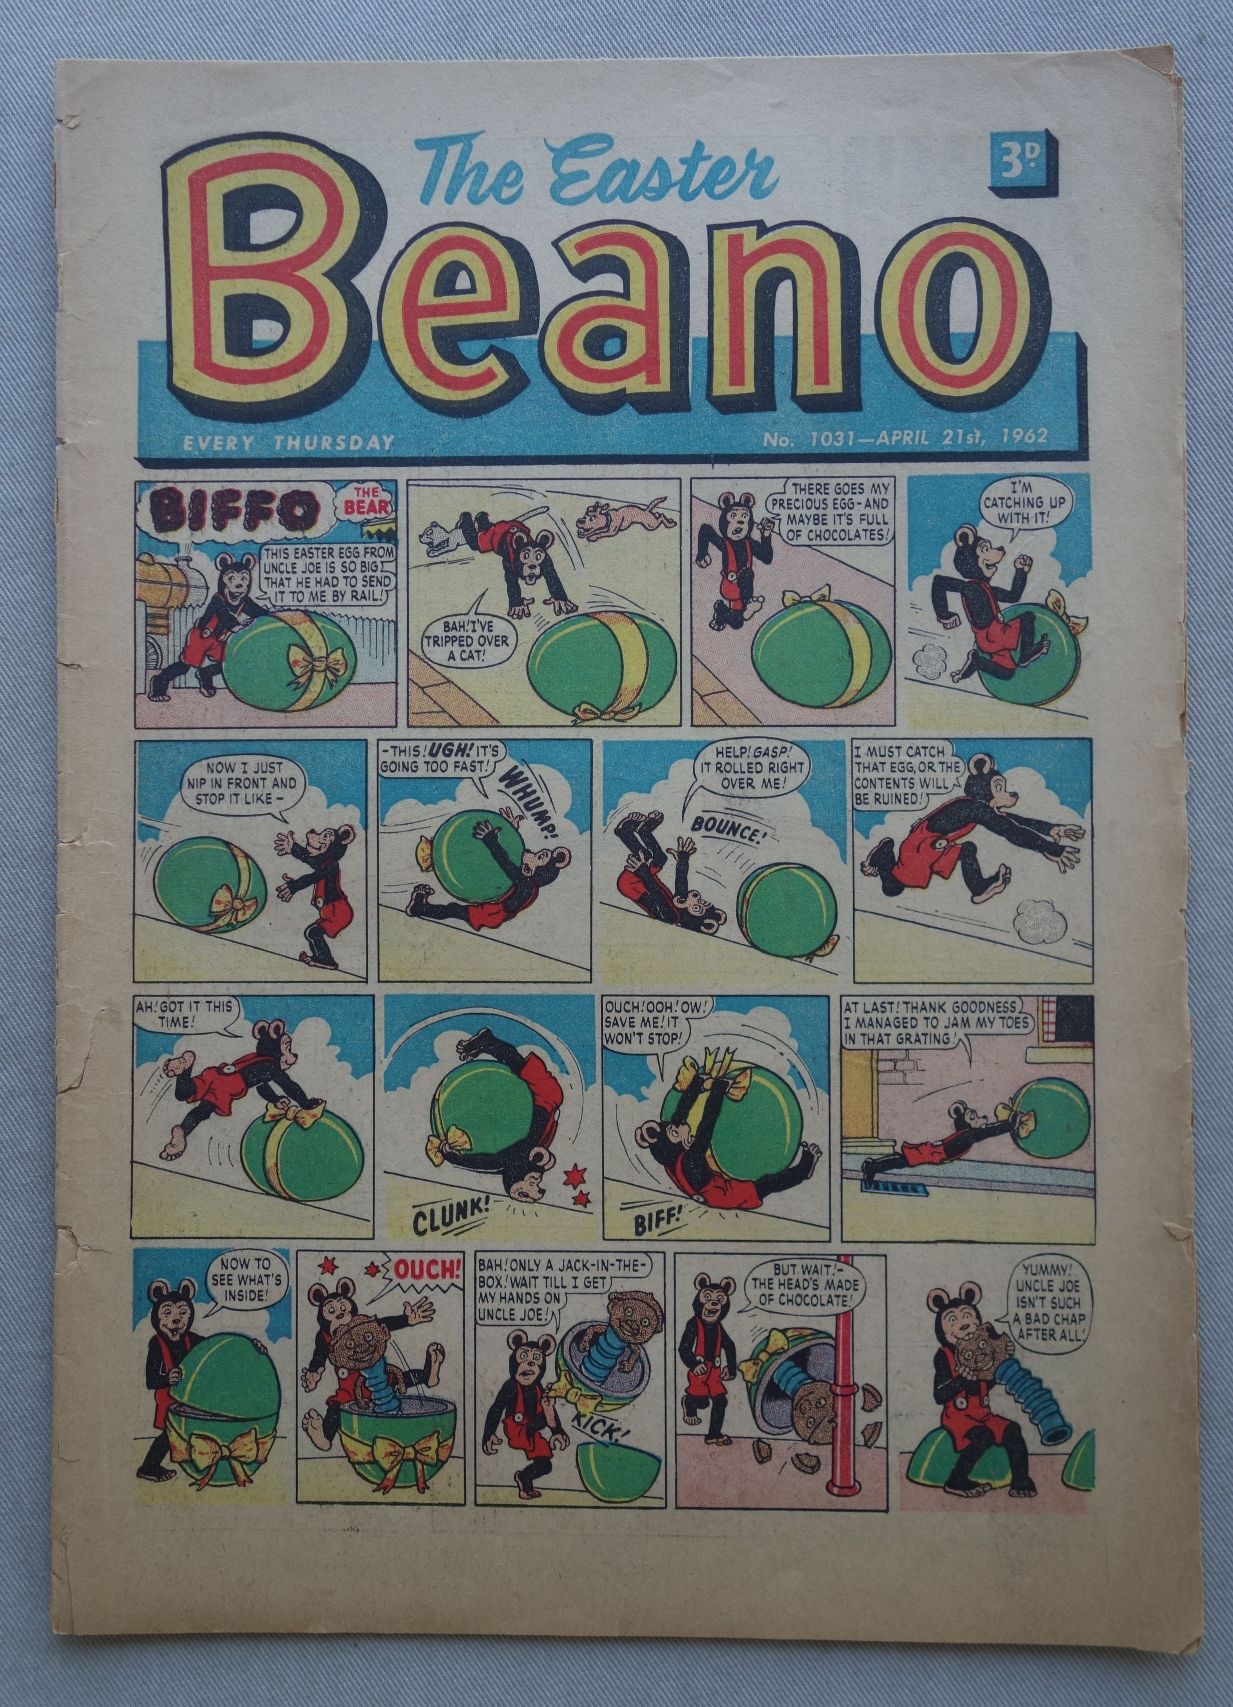 Beano No. 1031 - cover dated 21st April 1962